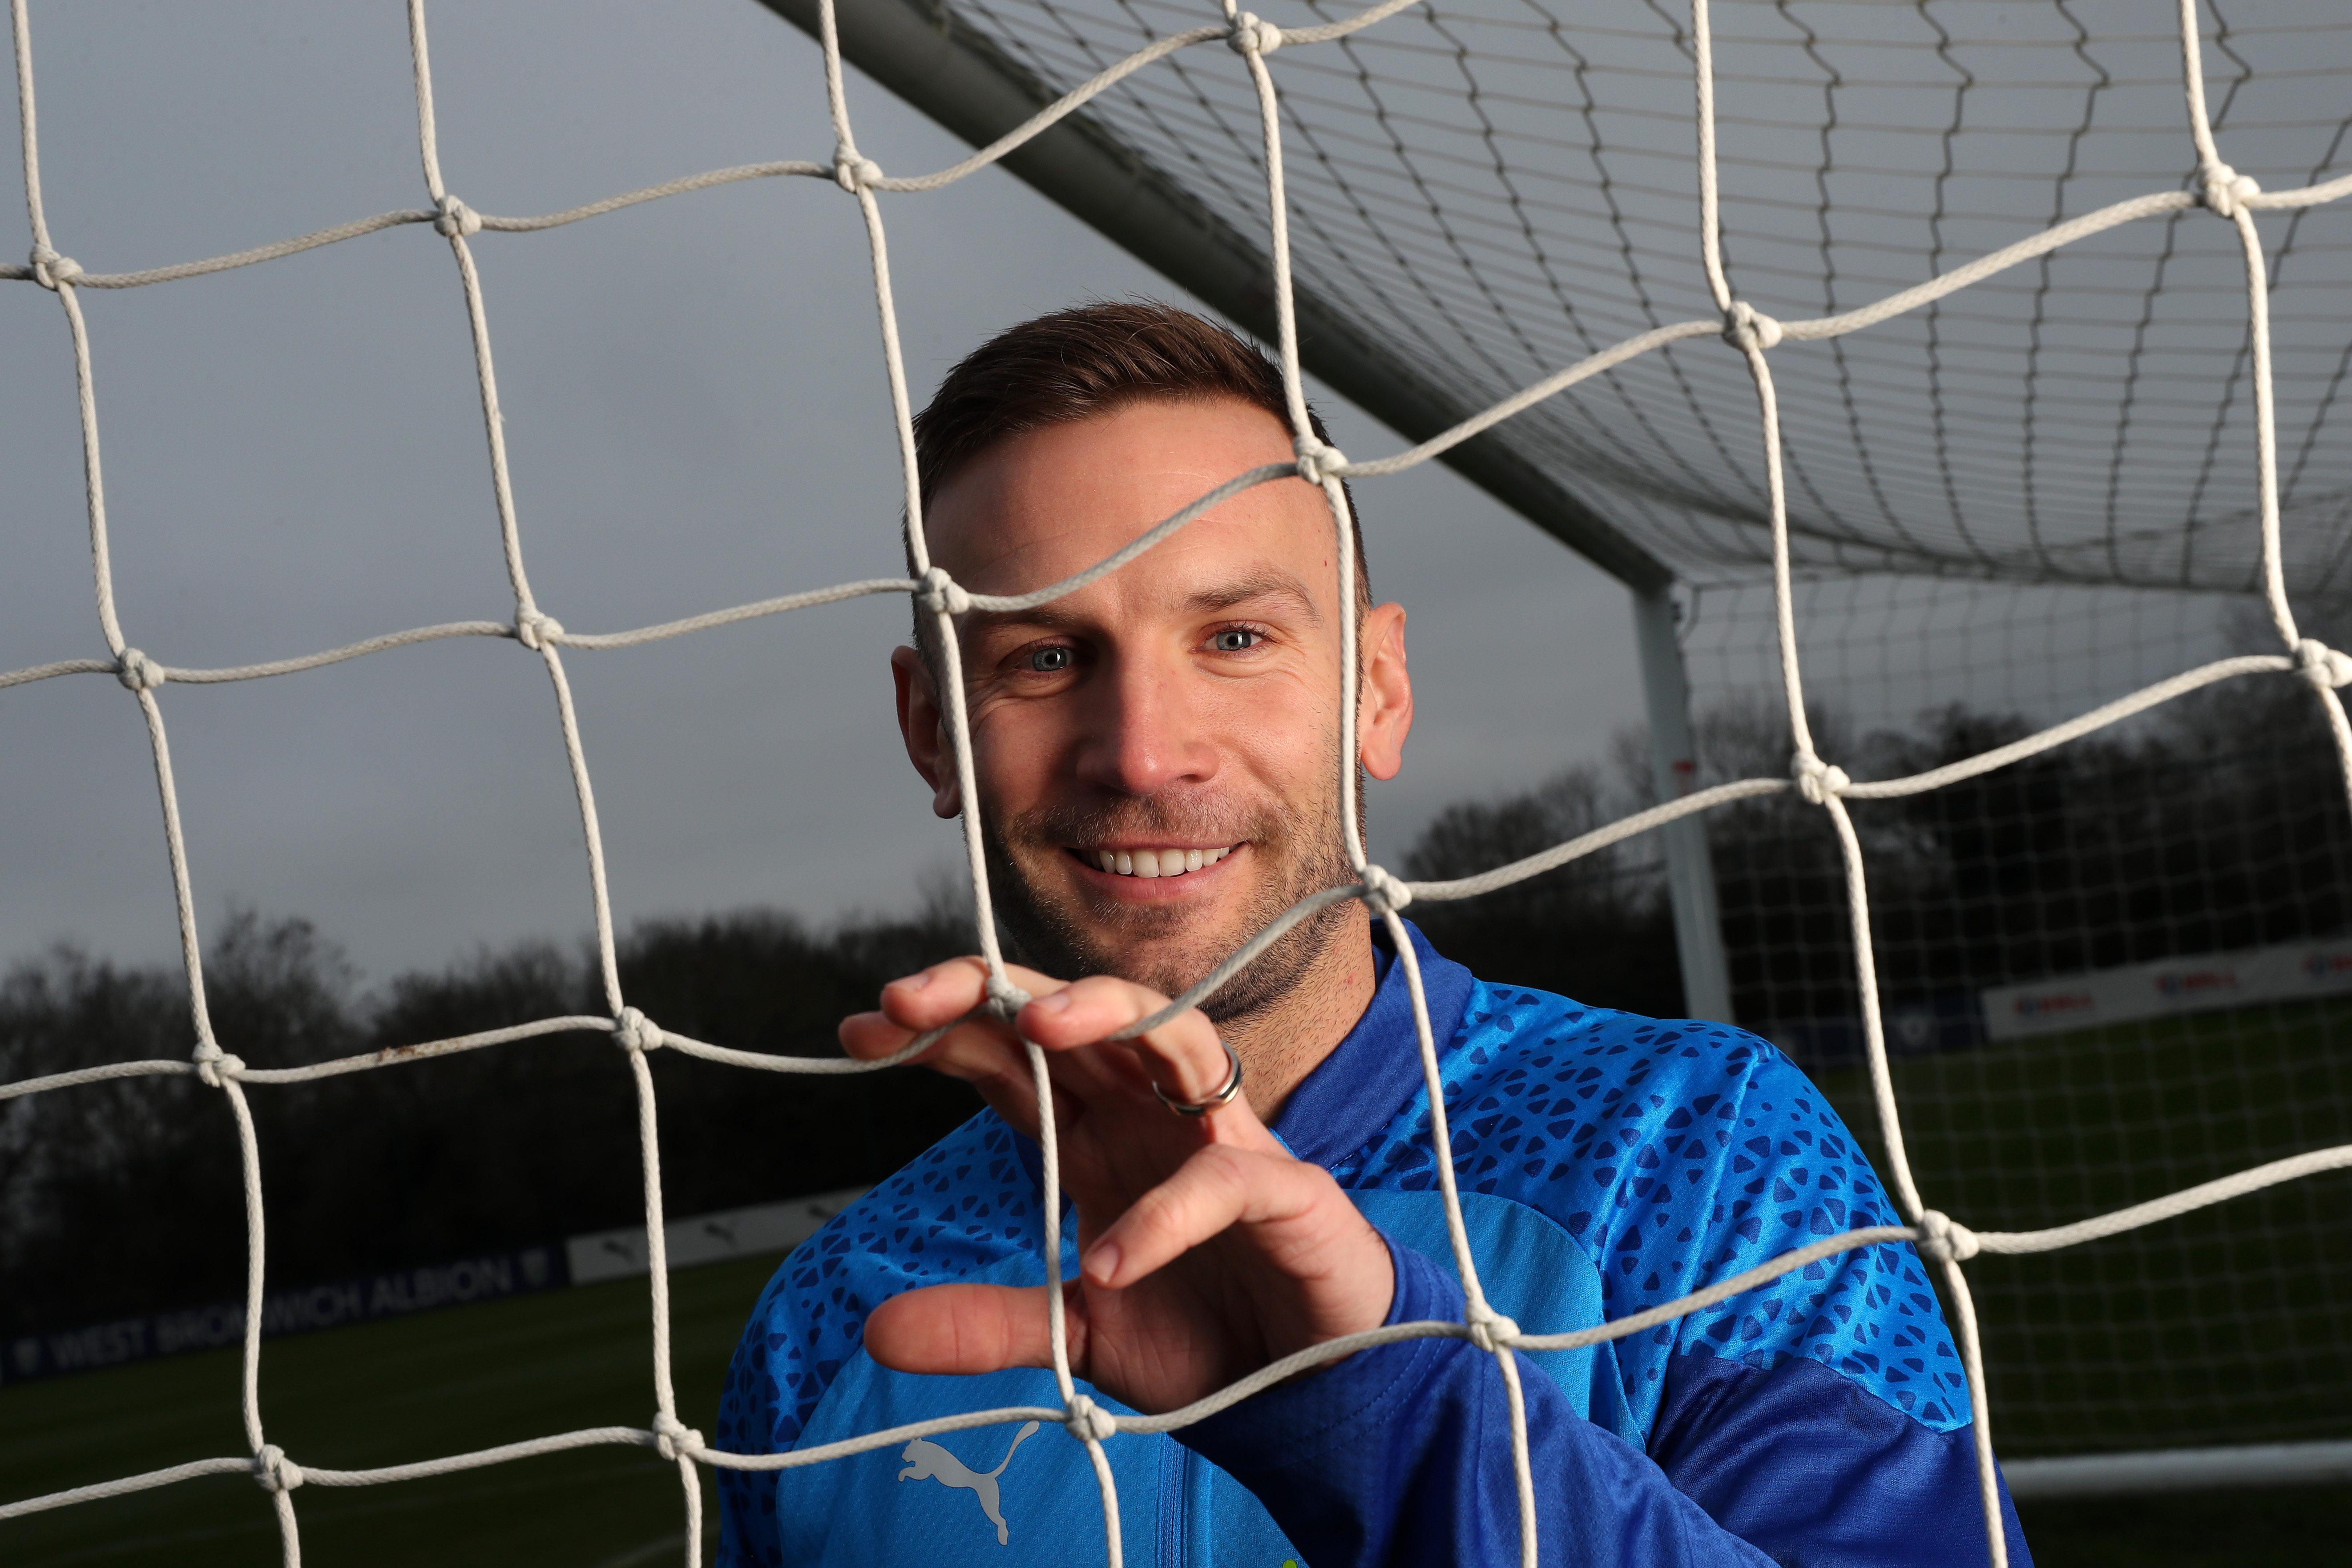 Andi Weimann smiling at the camera through a goal net